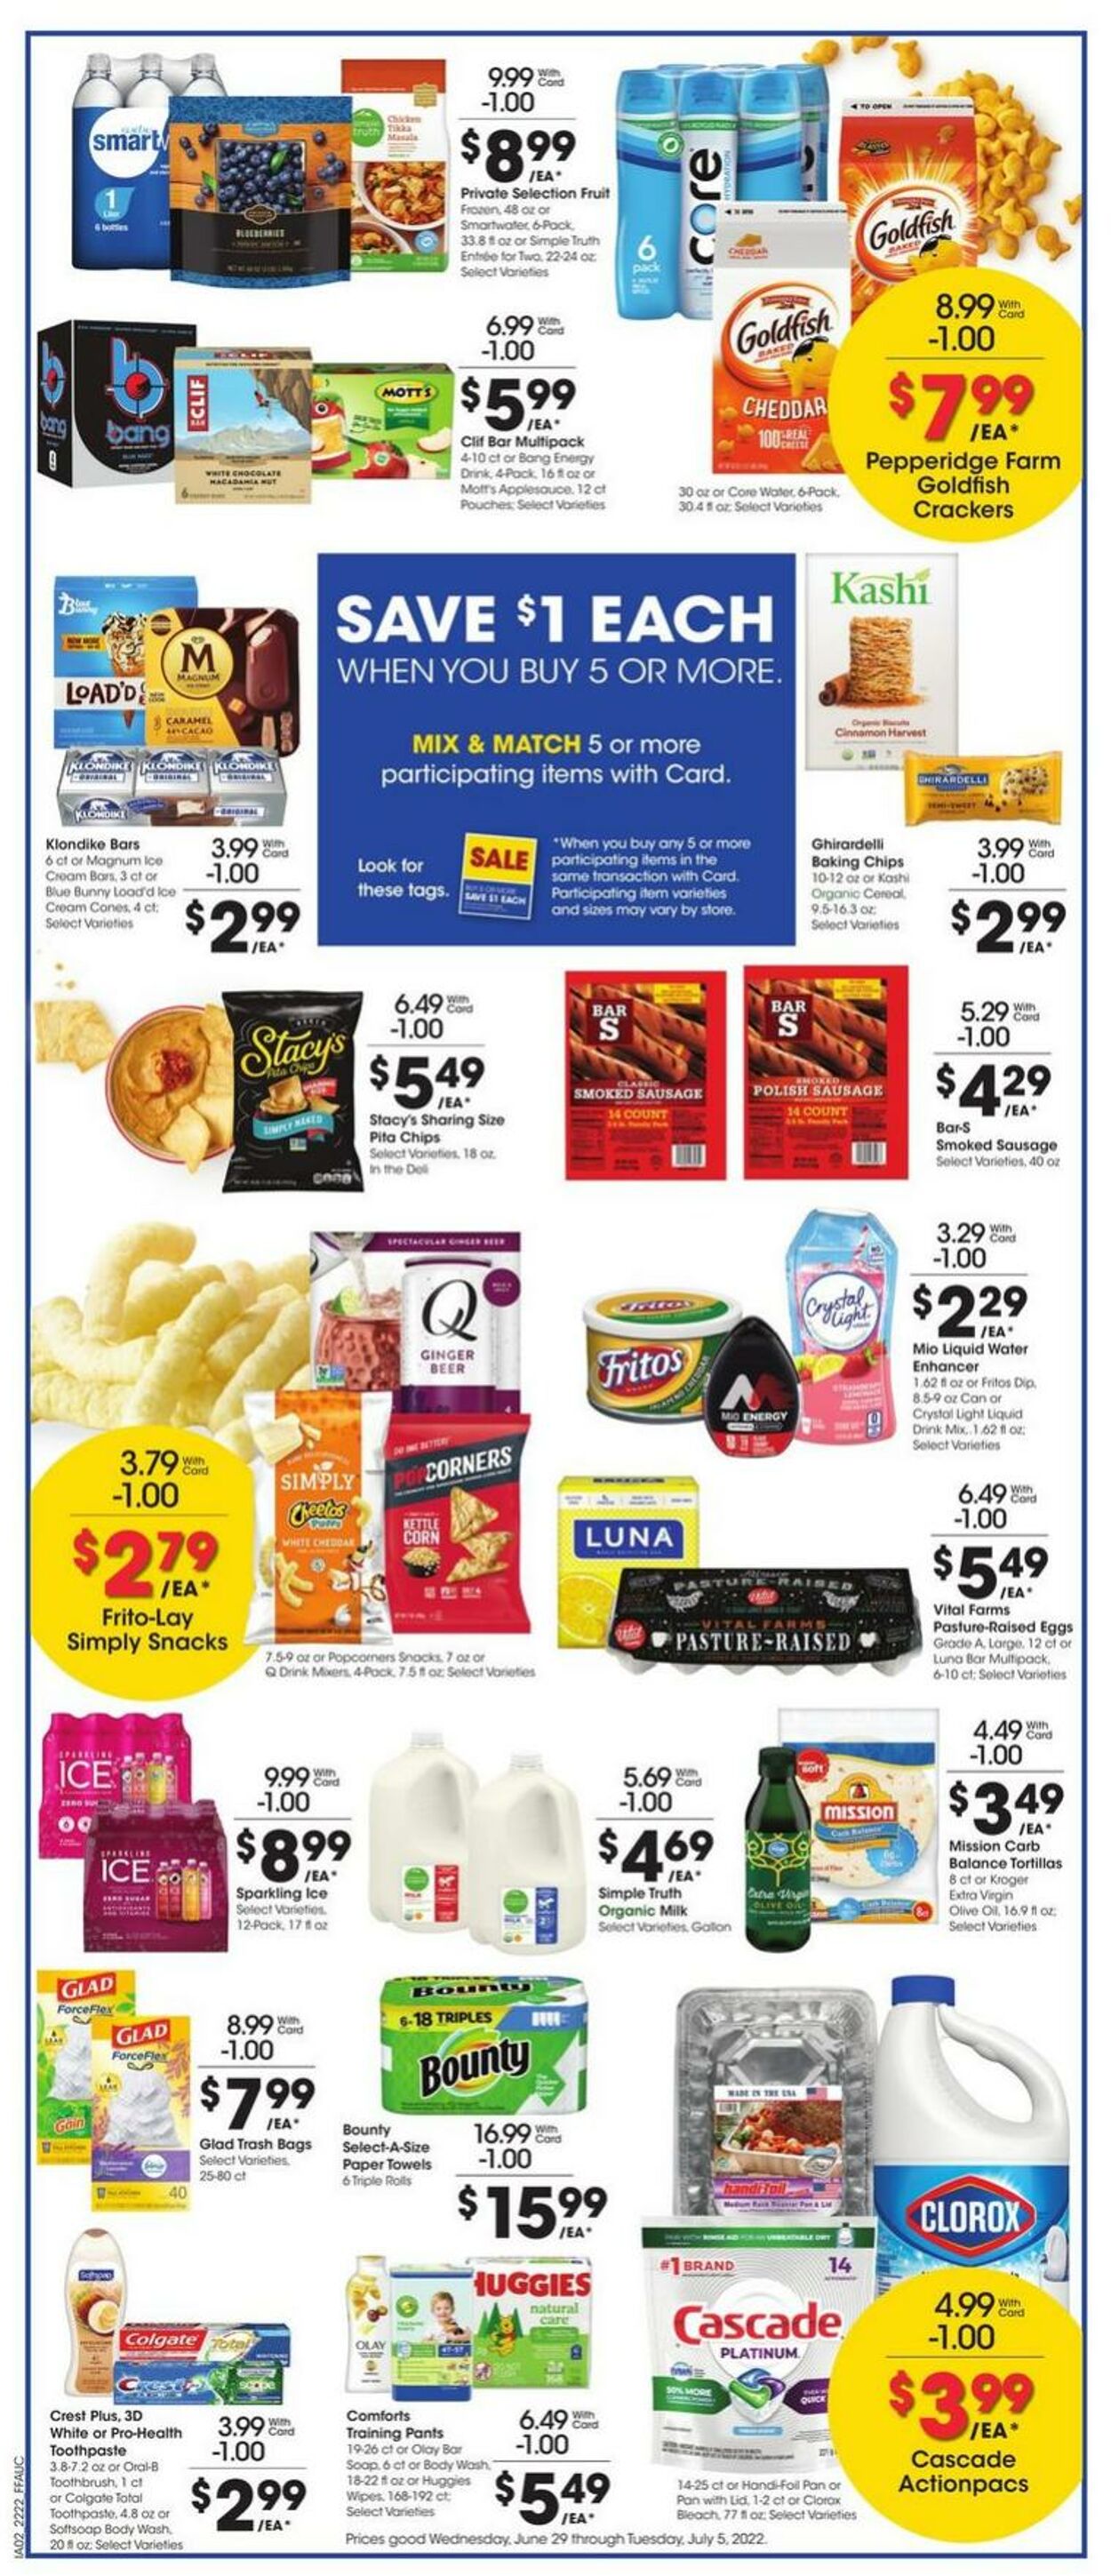 Weekly ad Fry's 06/29/2022 - 07/05/2022